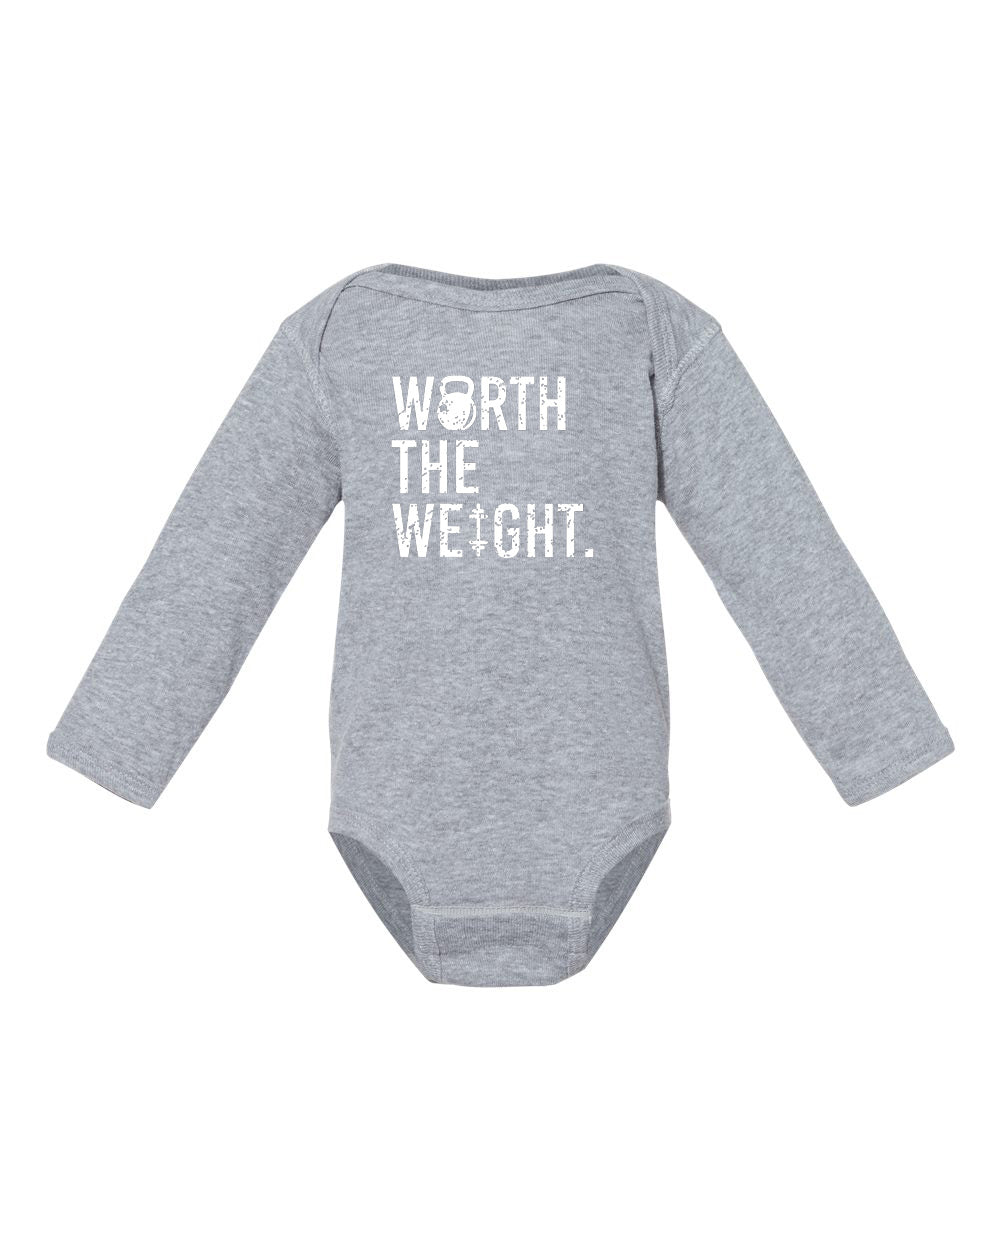 Worth The Weight LONG Sleeve Onesie